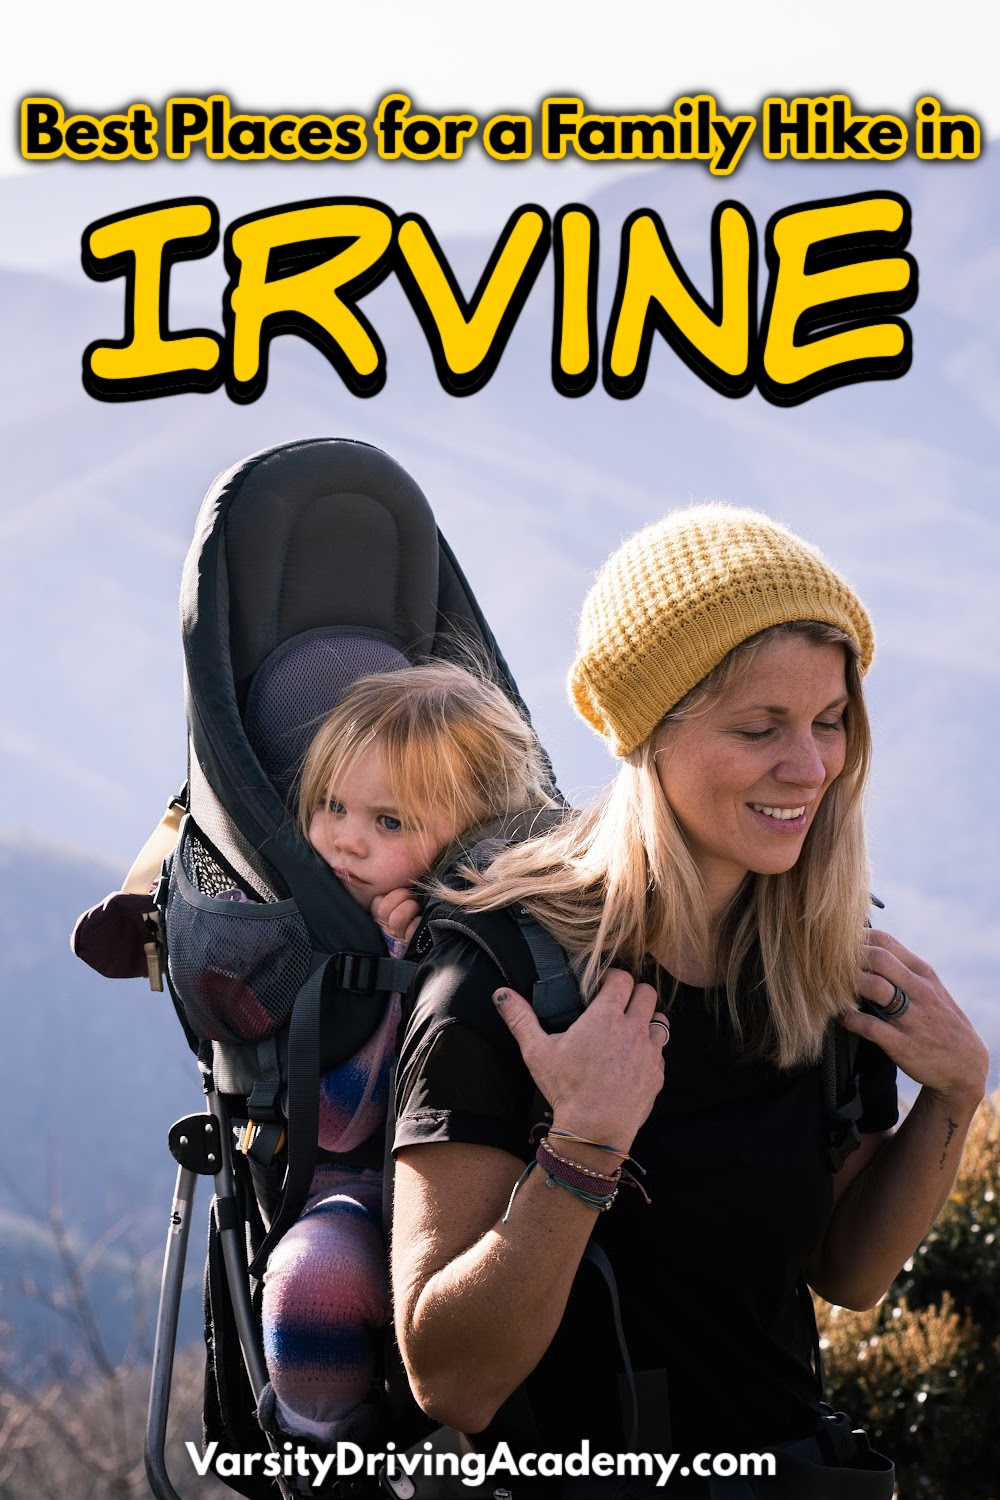 Take the whole family to enjoy the best places for a family hike in Irvine, just don’t forget the water and the camera because you'll need them.